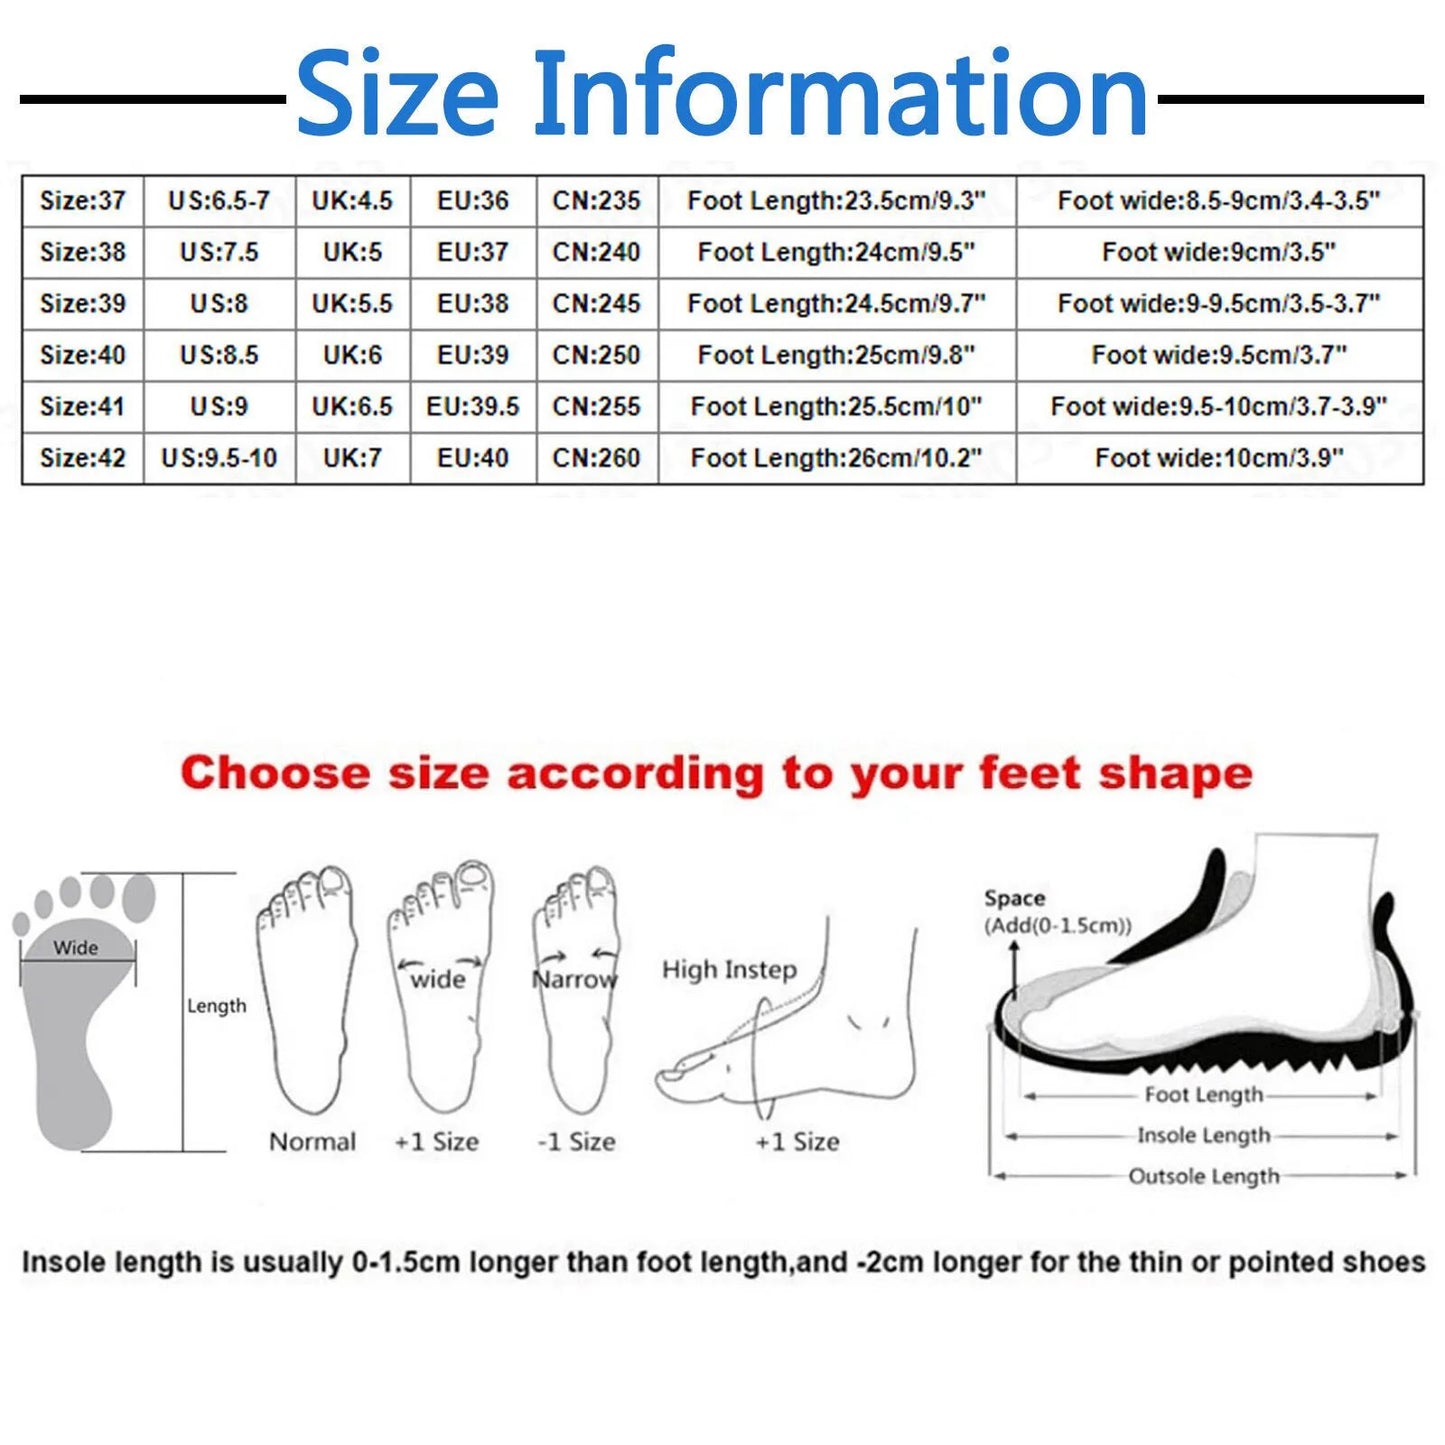 Summer Sneakers Sport Shoes For Women Platform Single Shoes/Rhinestone Comfortable Flat Shoes Female shoes